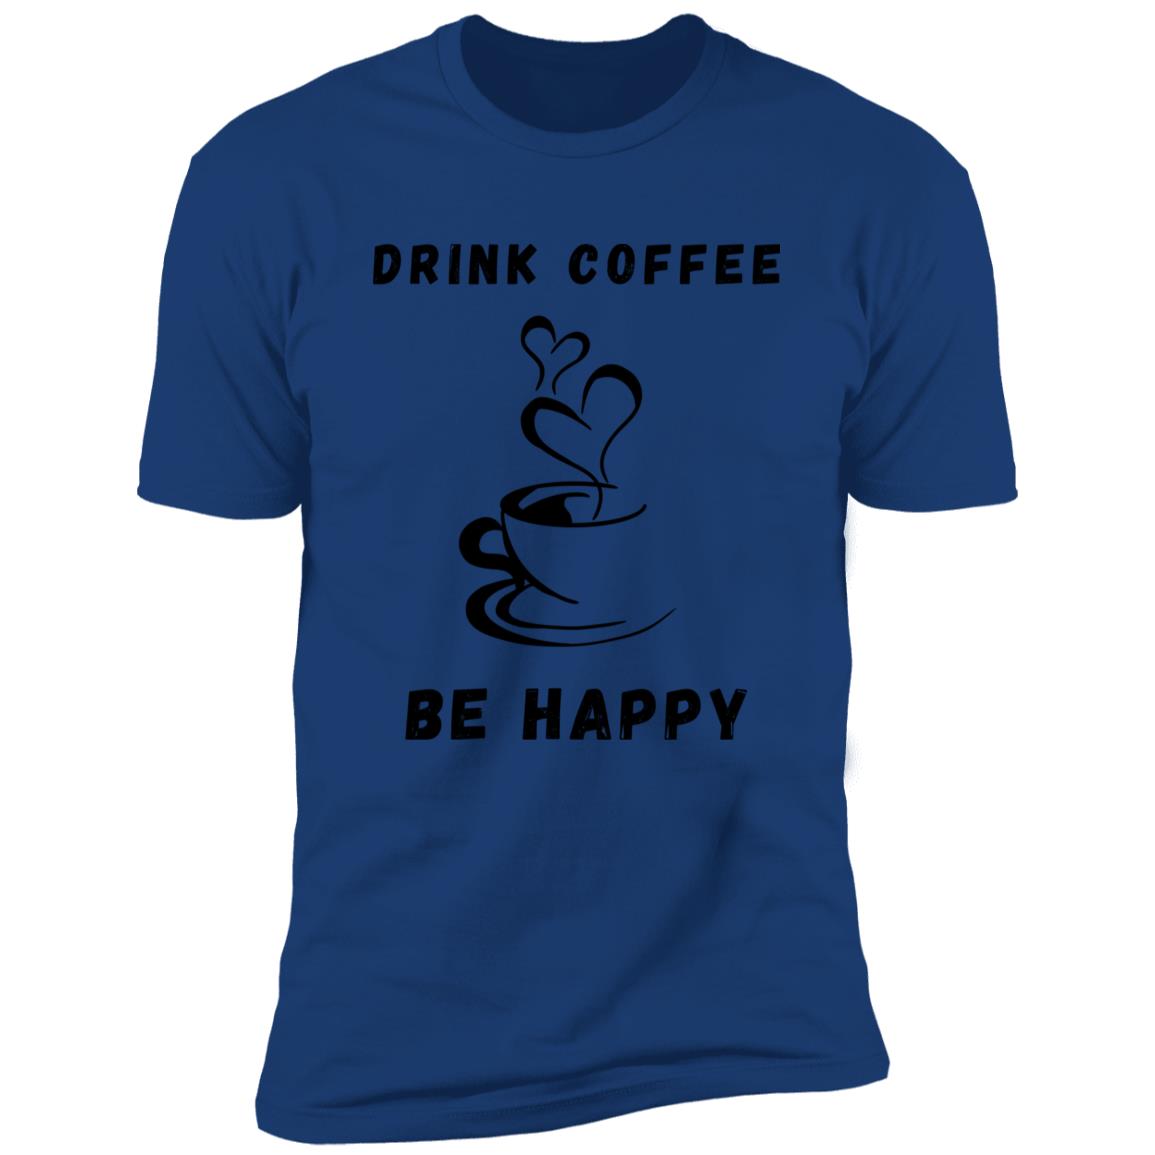 DRINK COFFEE BE HAPPY T SHIRT (UNISEX)